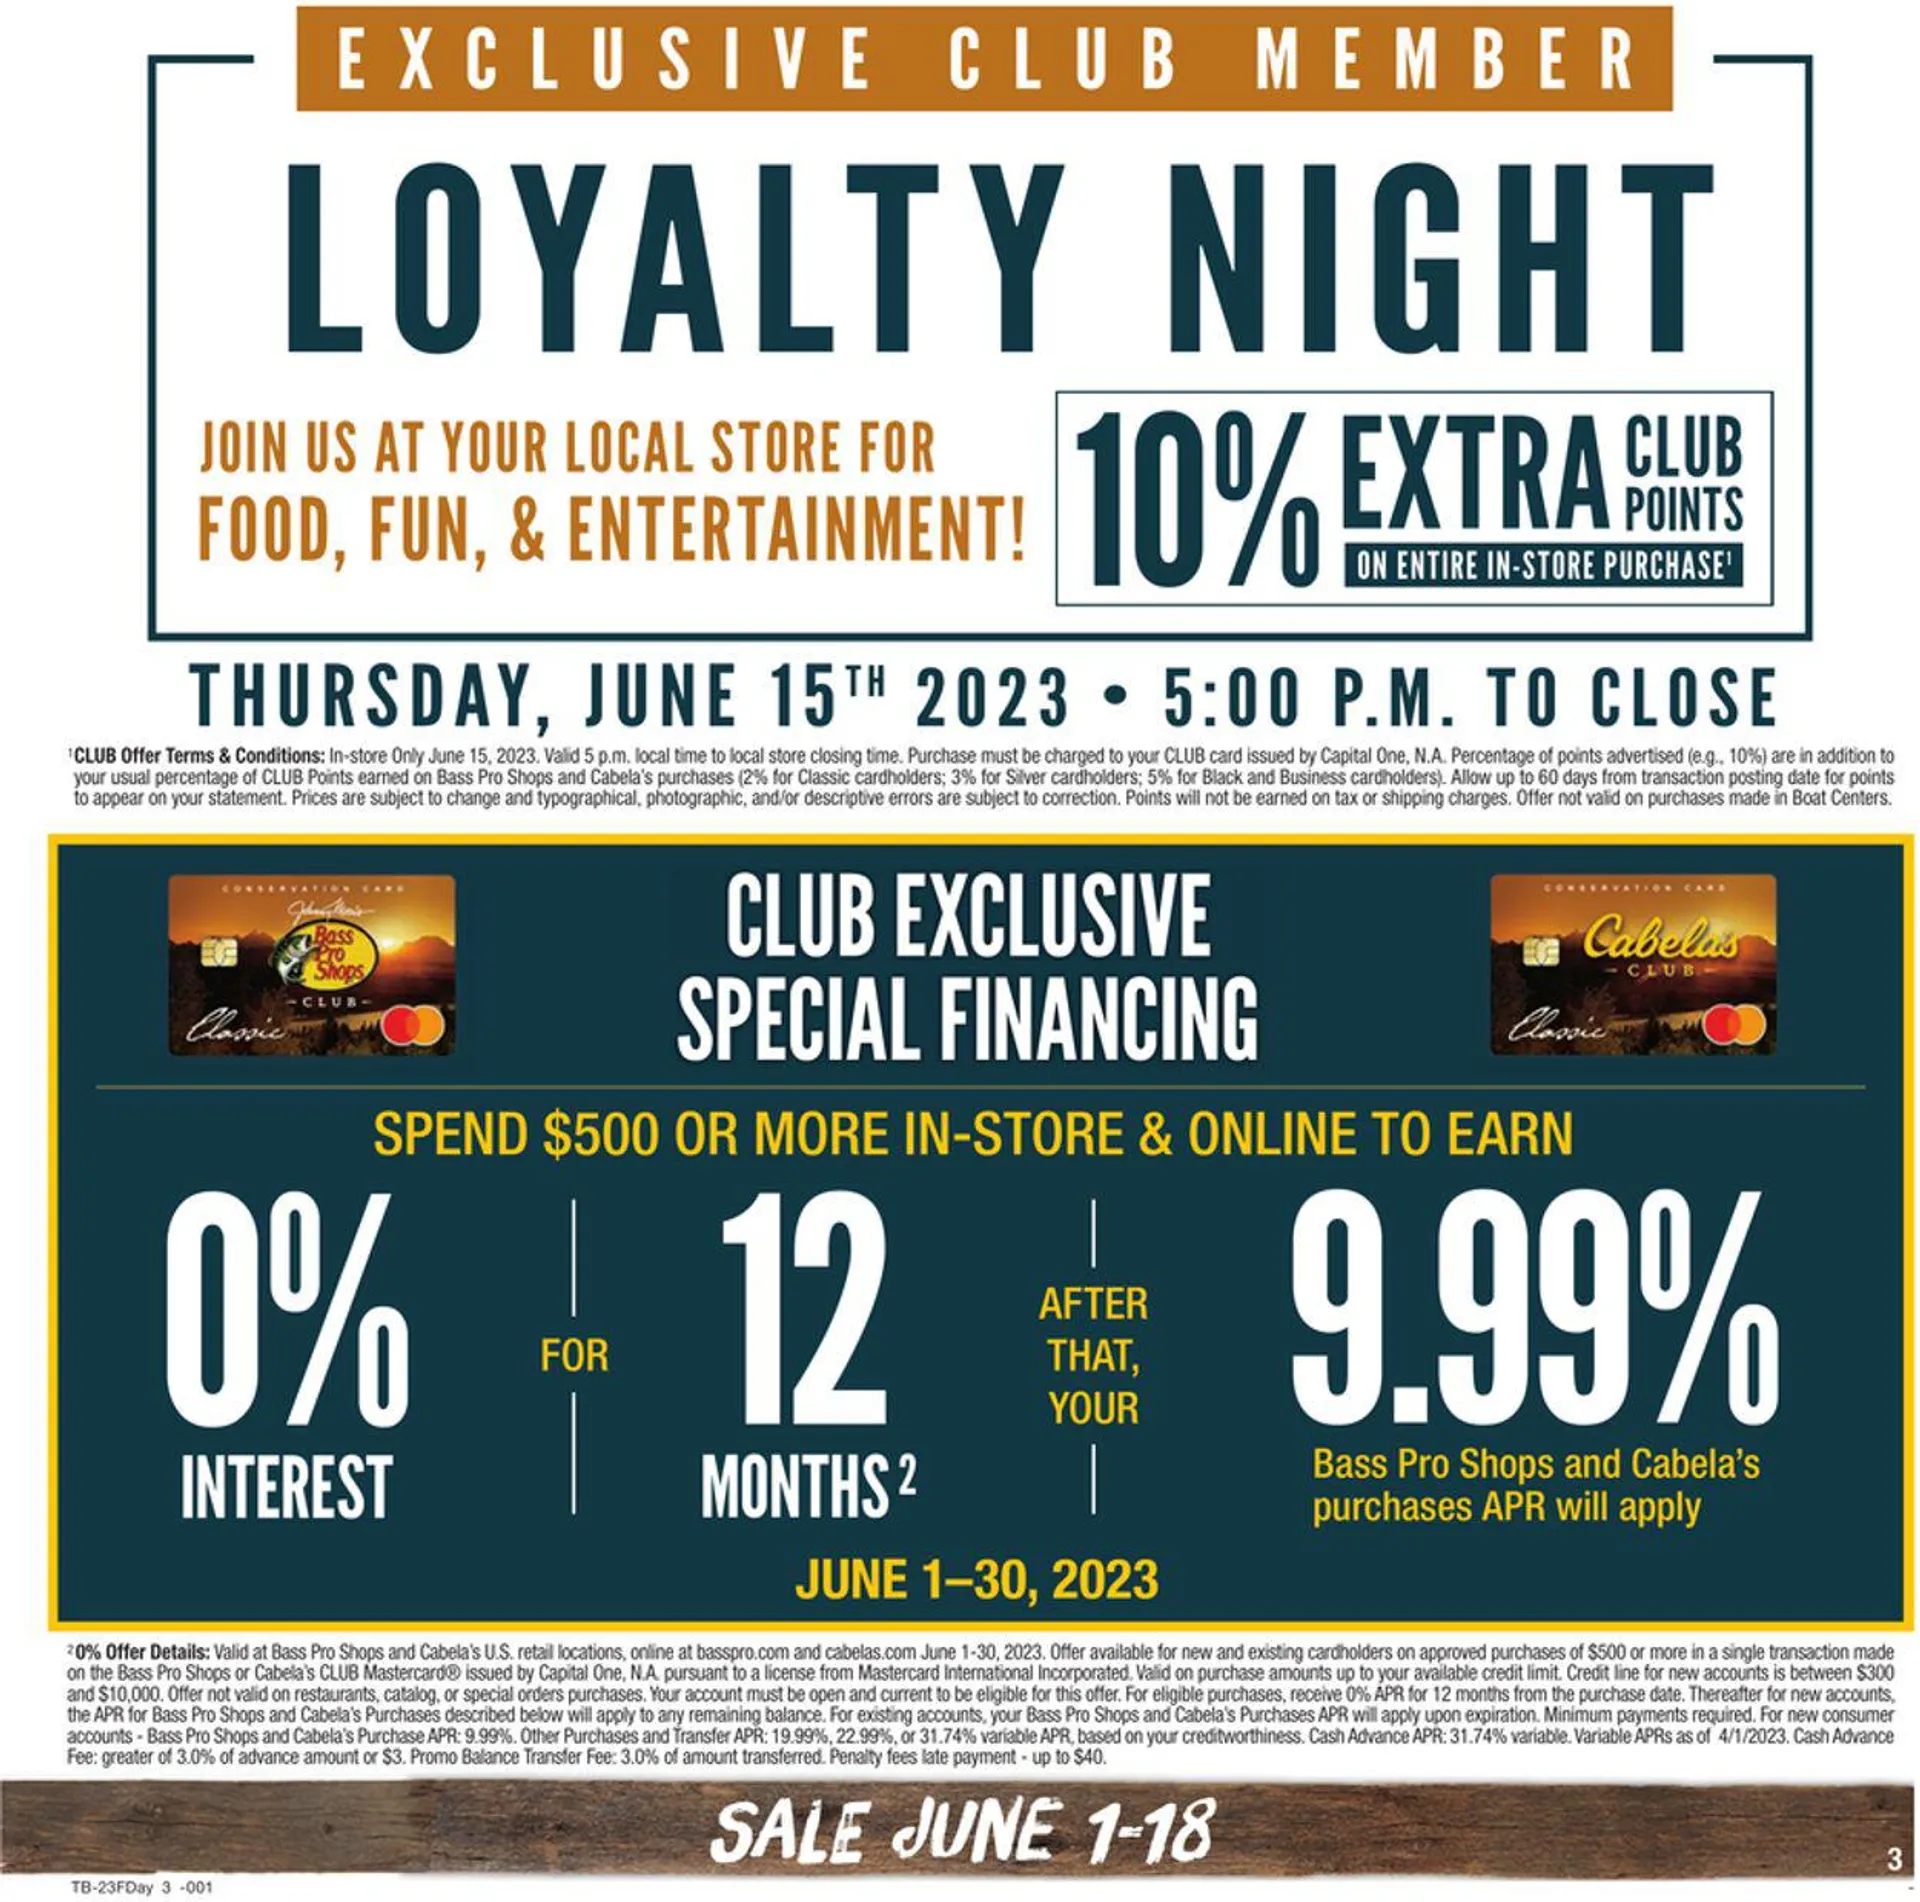 Bass Pro Current weekly ad - 3